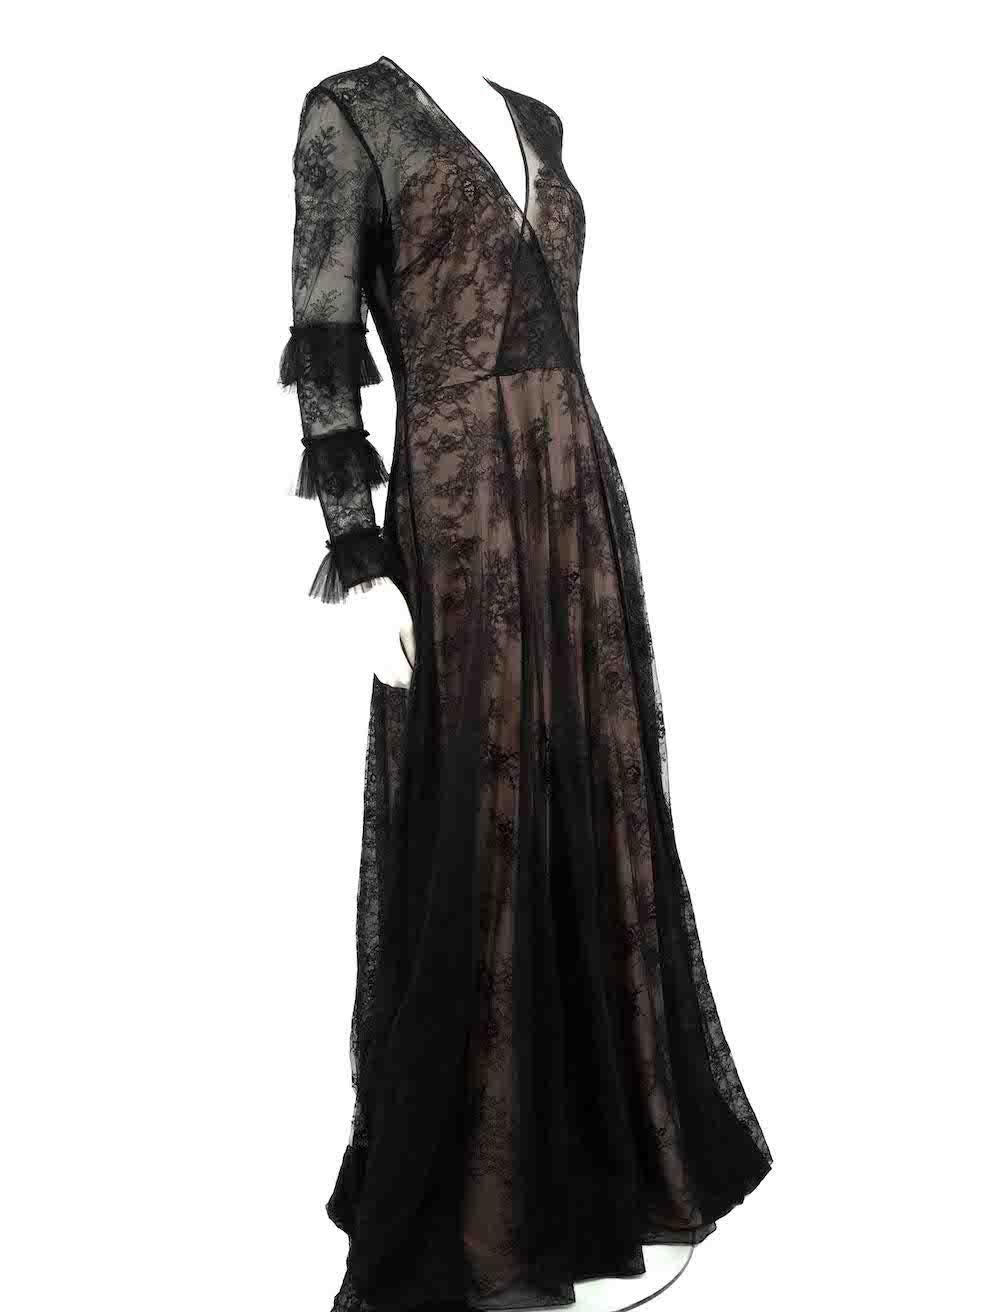 CONDITION is Never worn. No visible wear to dress is evident on this new Honayda designer resale item.
 
 
 
 Details
 
 
 Black
 
 Floral lace
 
 Gown
 
 Long sheer sleeves
 
 Ruffle detail
 
 V-neck
 
 Maxi
 
 Back zip and hook fastening
 
 
 
 
